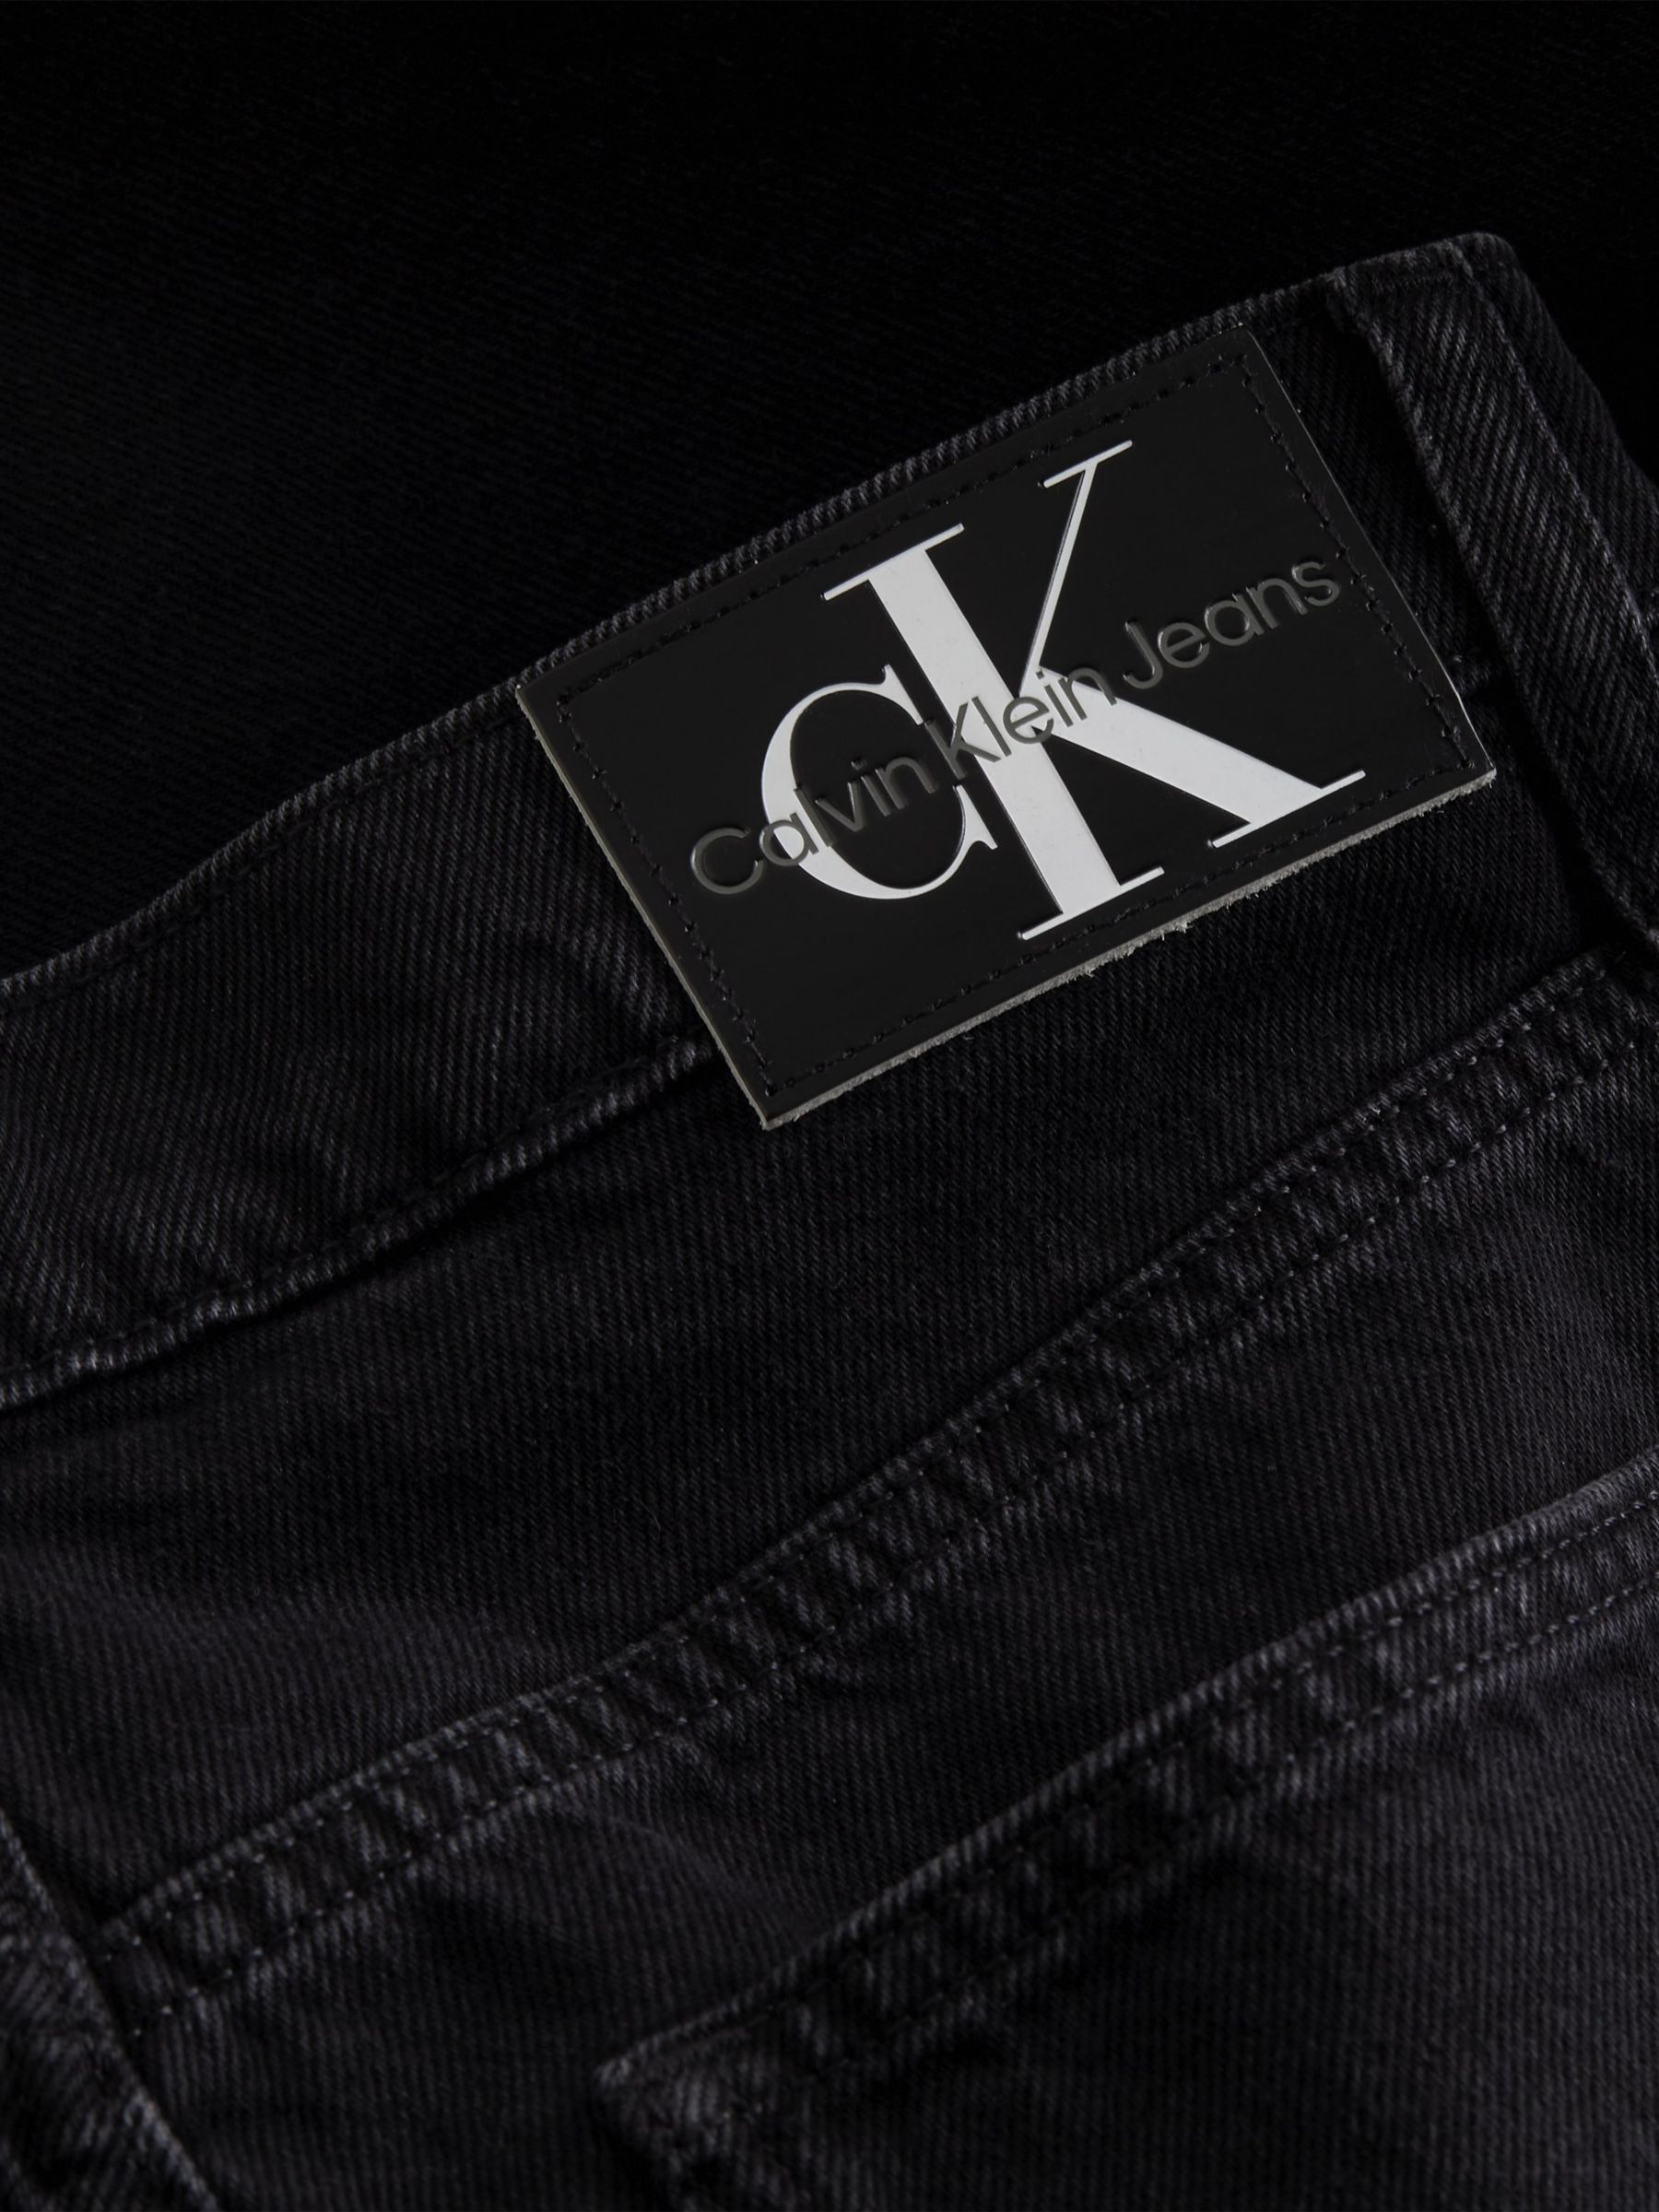 Buy Calvin Klein Low Rise Relaxed Jeans, Black Online at johnlewis.com